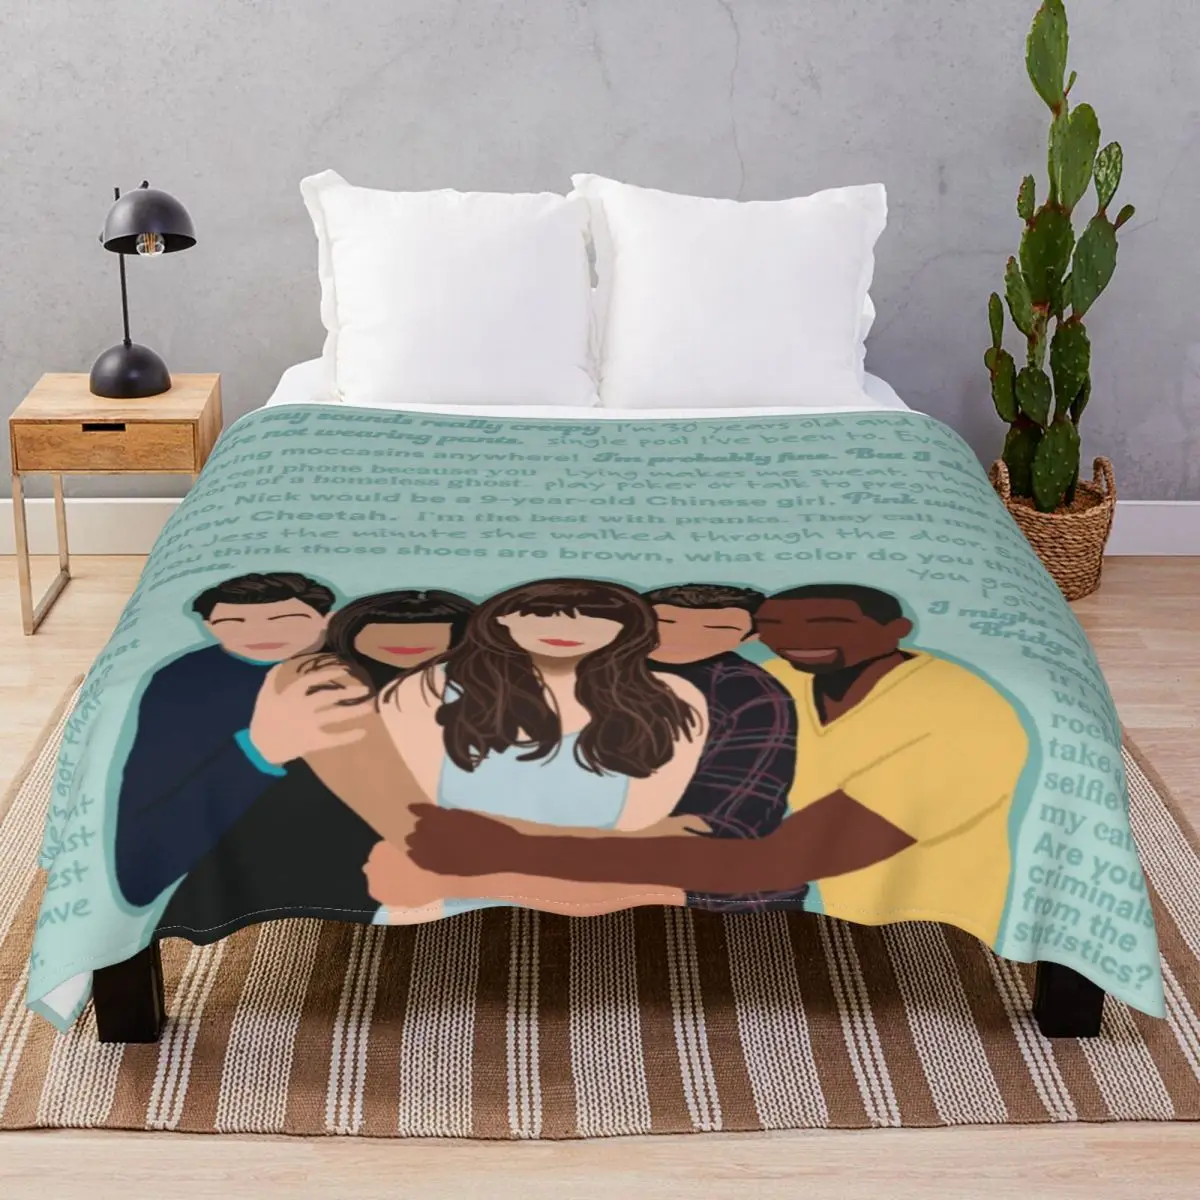 

New Girl Cast And Quotes Blankets Fleece Spring/Autumn Lightweight Thin Throw Blanket for Bed Sofa Camp Cinema